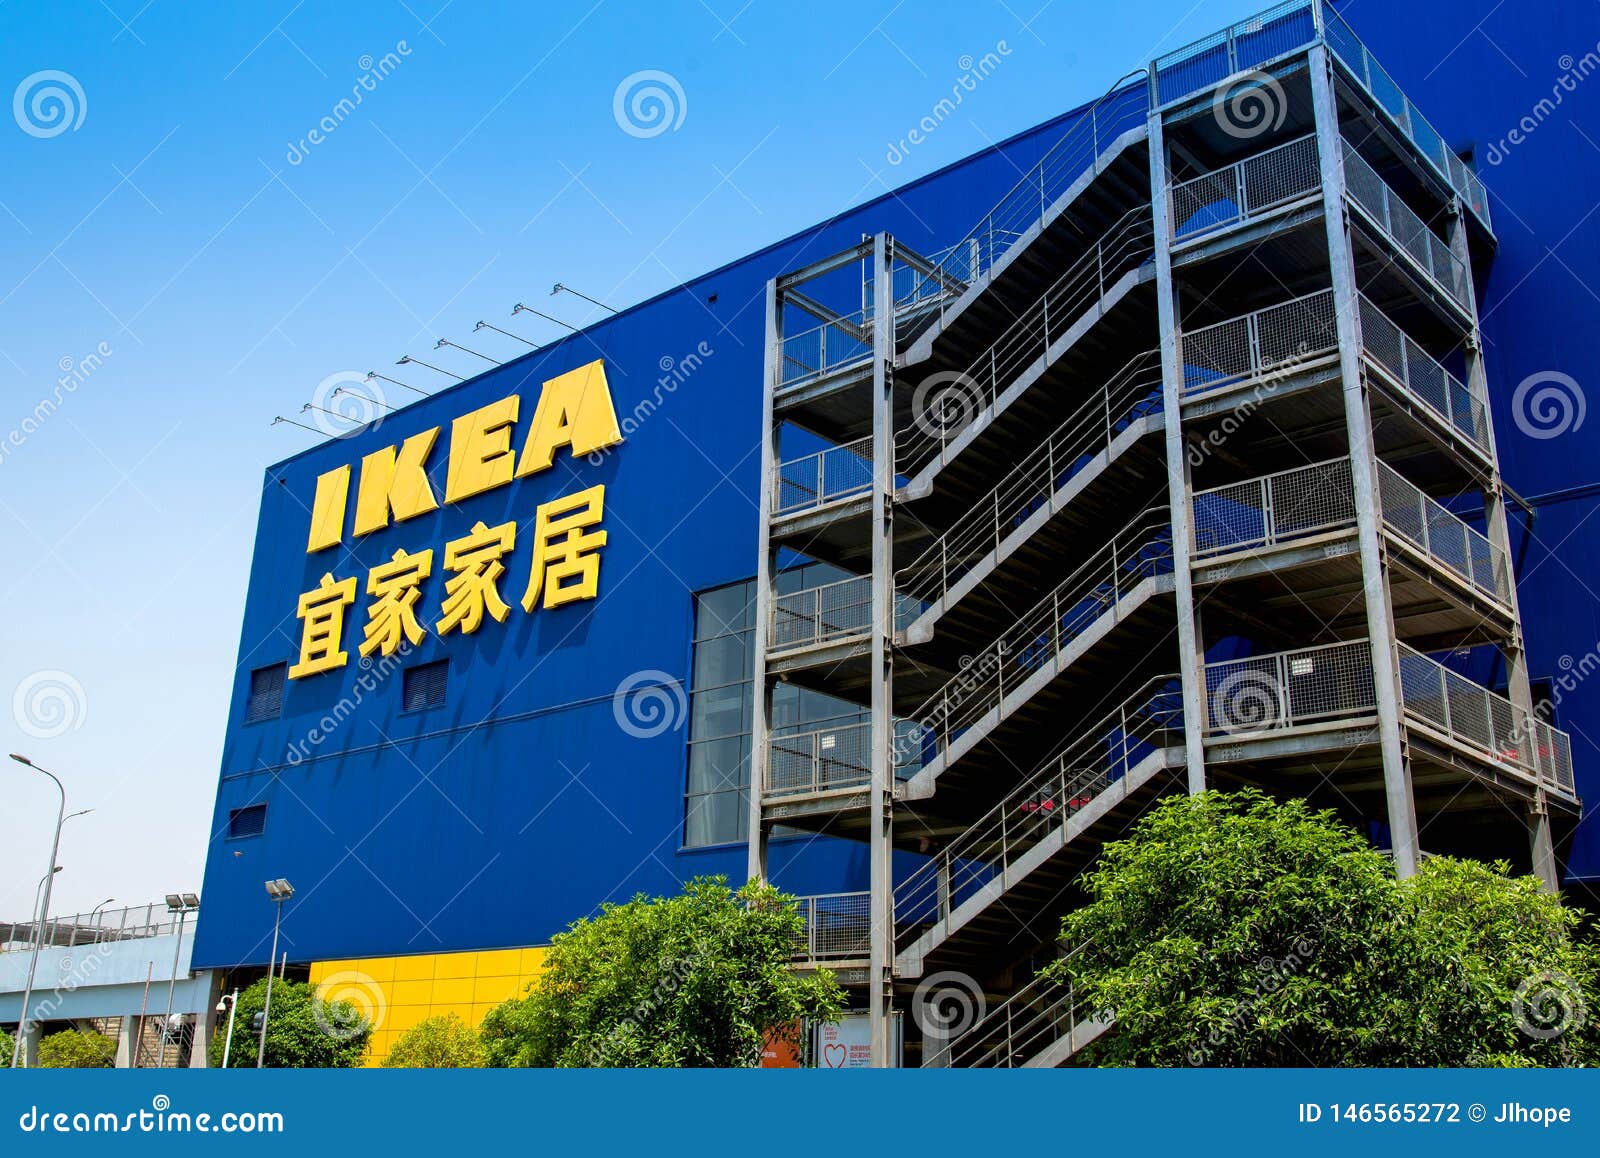 Ikea Furniture Retail Store In Wuhan City China Editorial